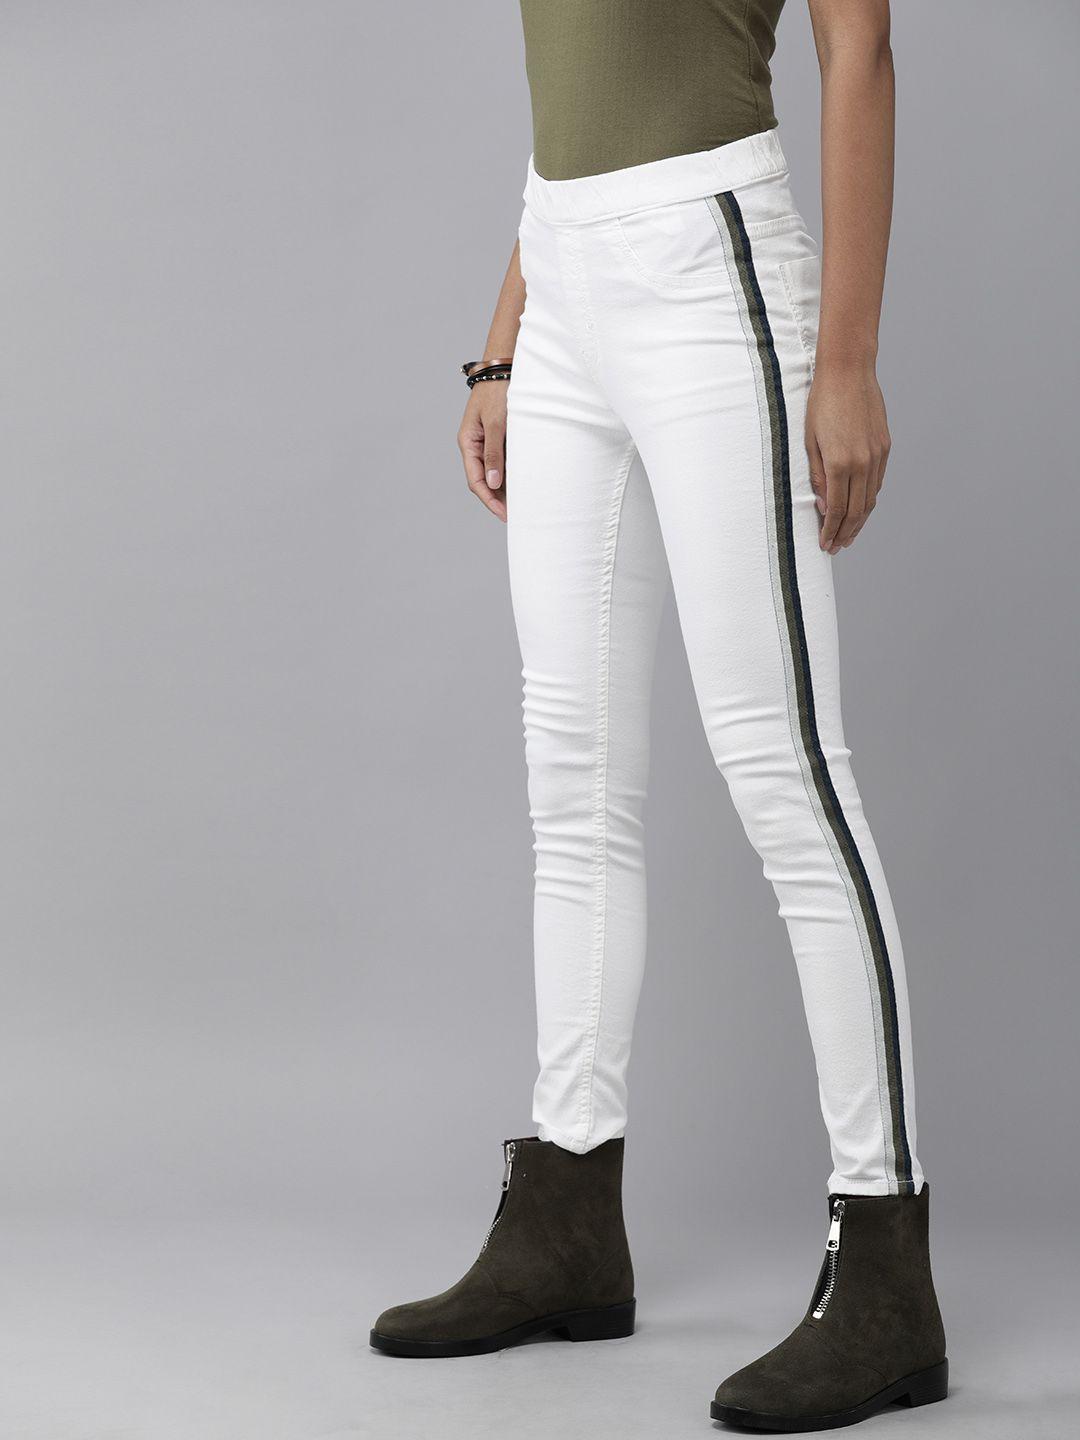 the roadster lifestyle co women white solid cropped jeggings with side stripes